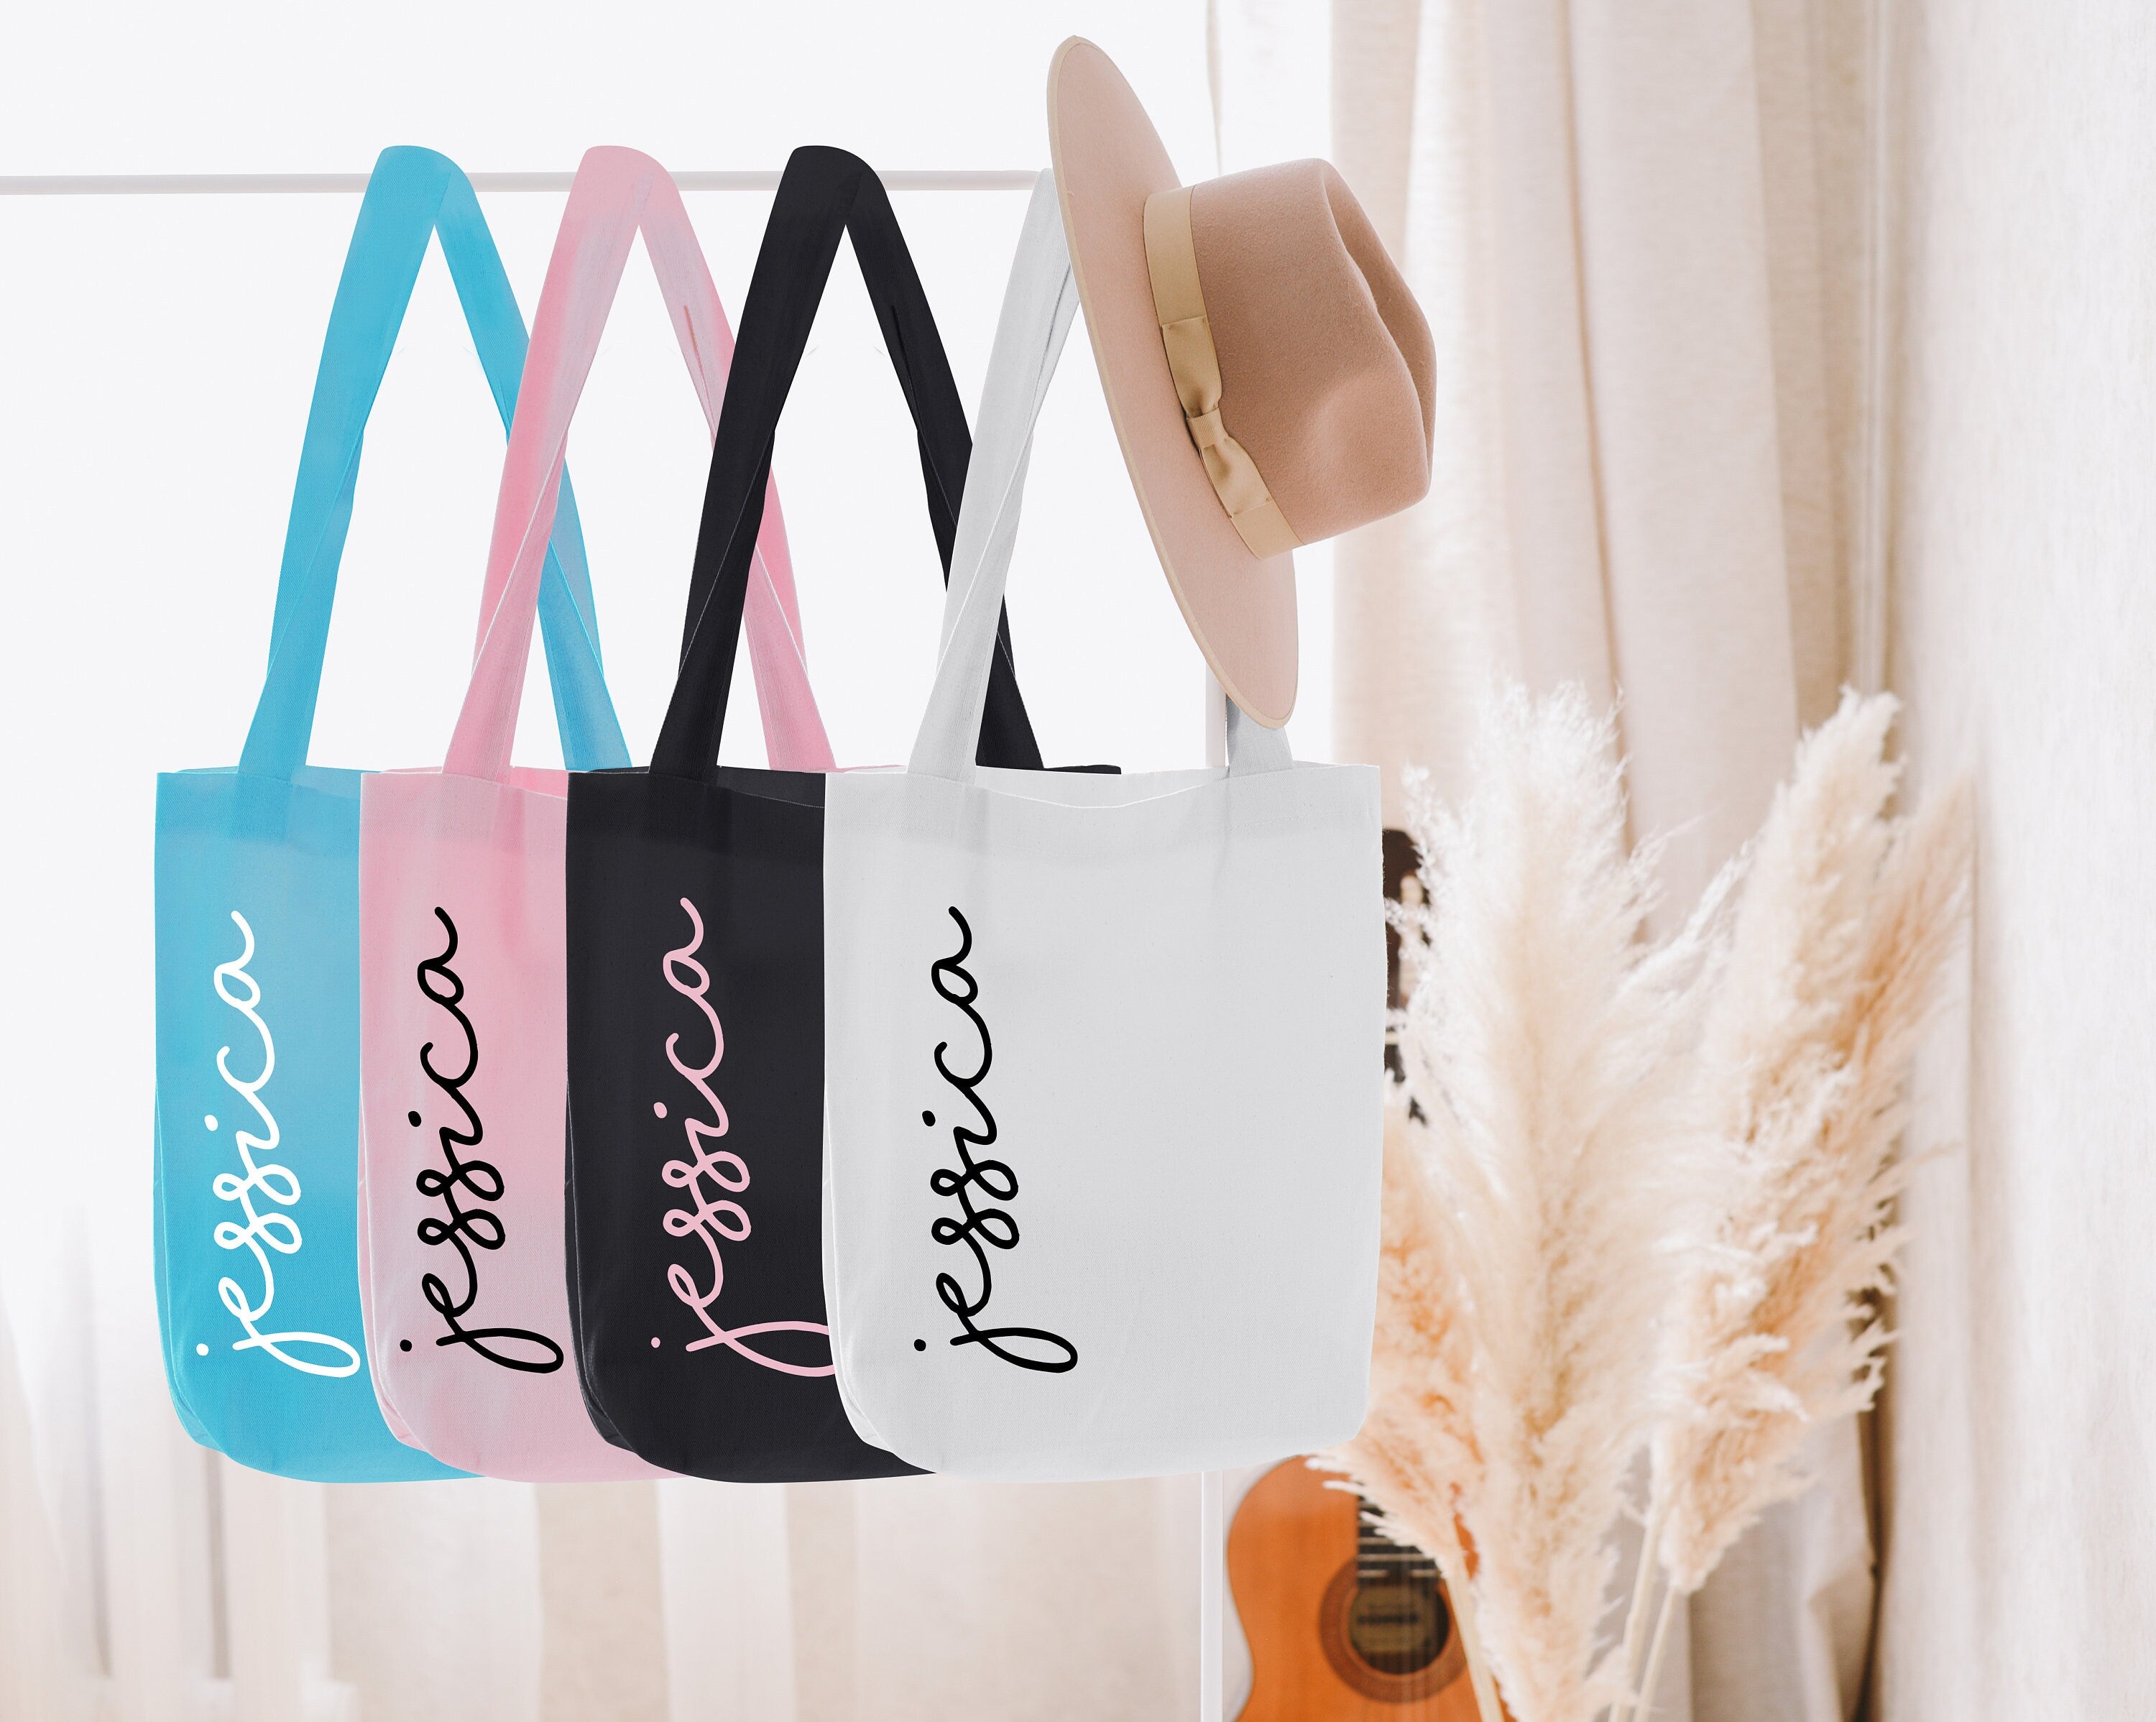 Custom Print Tote - Party Favors Bags - Bag For Bridesmaid - Personalized Tote - Cotton Tote Bag - Eco Friendly Gifts